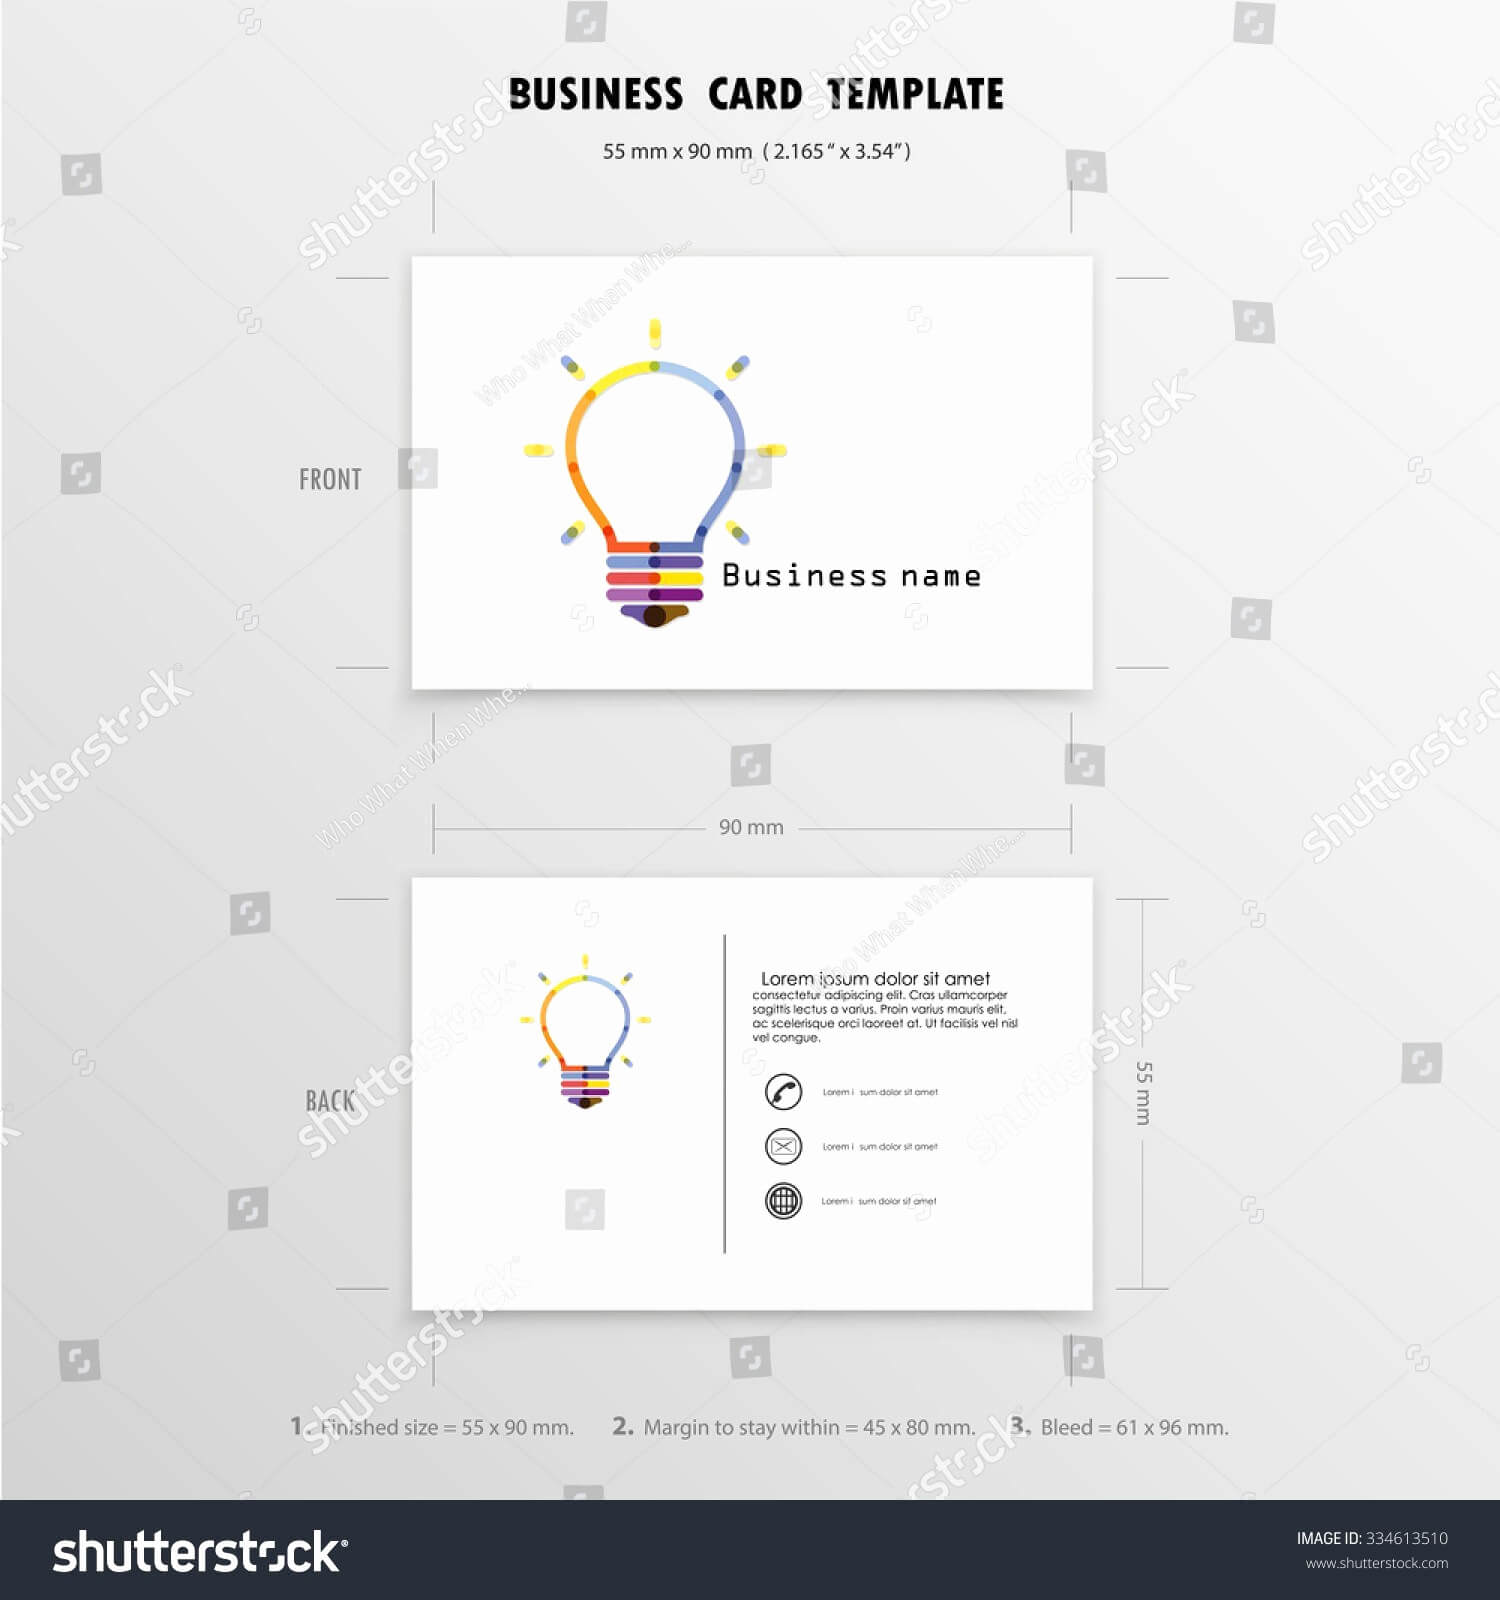 Business Card Size Ai In Pixels Photoshop Mm Sample Kit A7 Pertaining To Business Card Size Photoshop Template